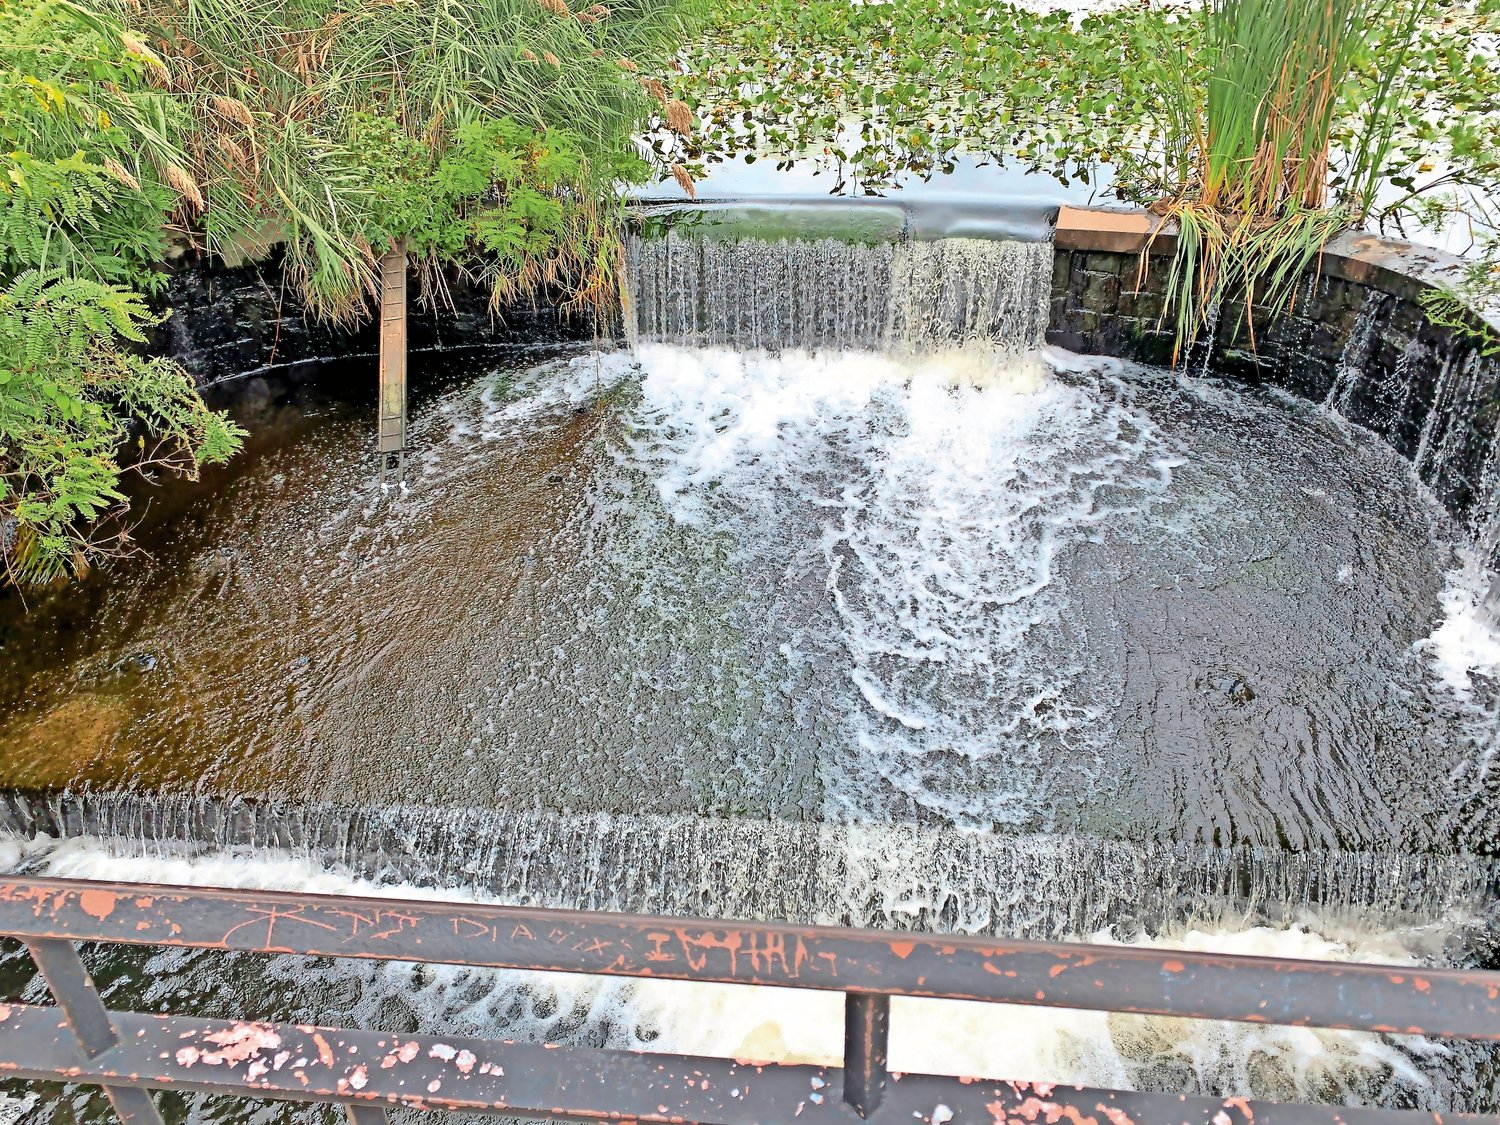 The dam at the end of Bellmore Creek blocks herring from spawning in Mill Pond. The Fish Passage Project will soon take public input from residents on the installation of a ladder or man-made channel to help them pass.